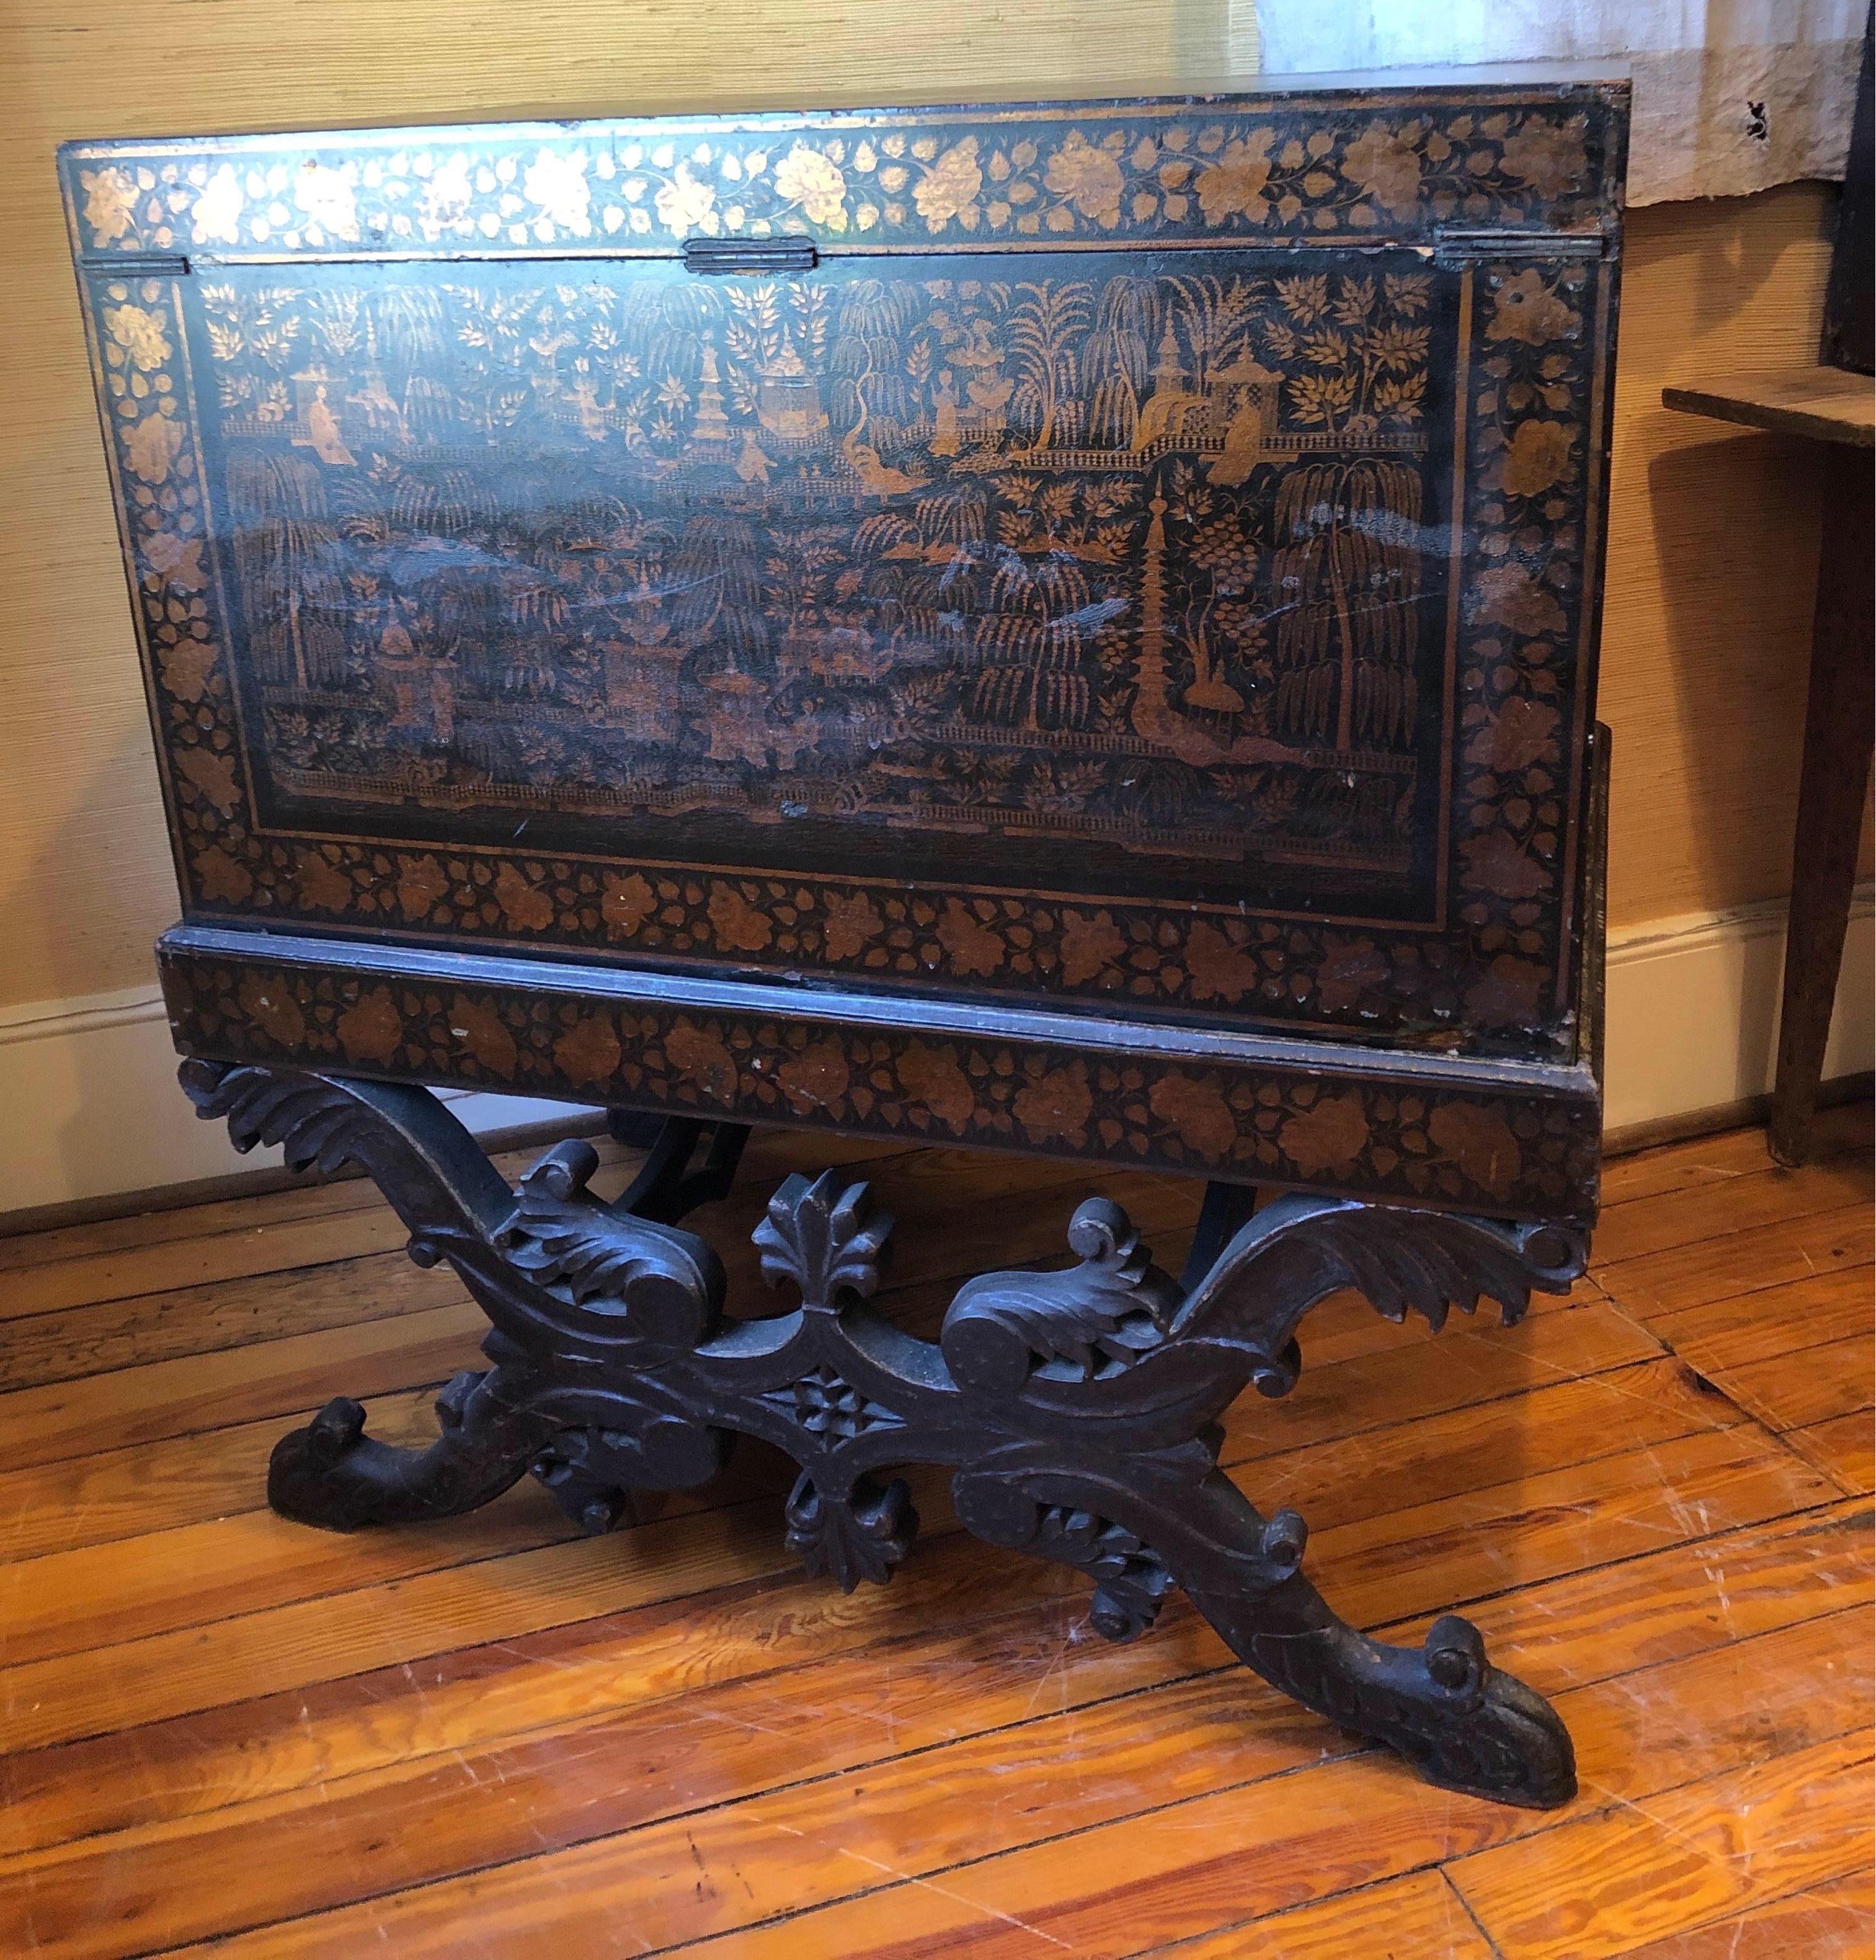 Very striking 19th century British lacquered chinoiserie chest on stand. The chinoiserie decoration is incredible and finished all around. The stand is carved and decorated. Interior of chest is in teal.